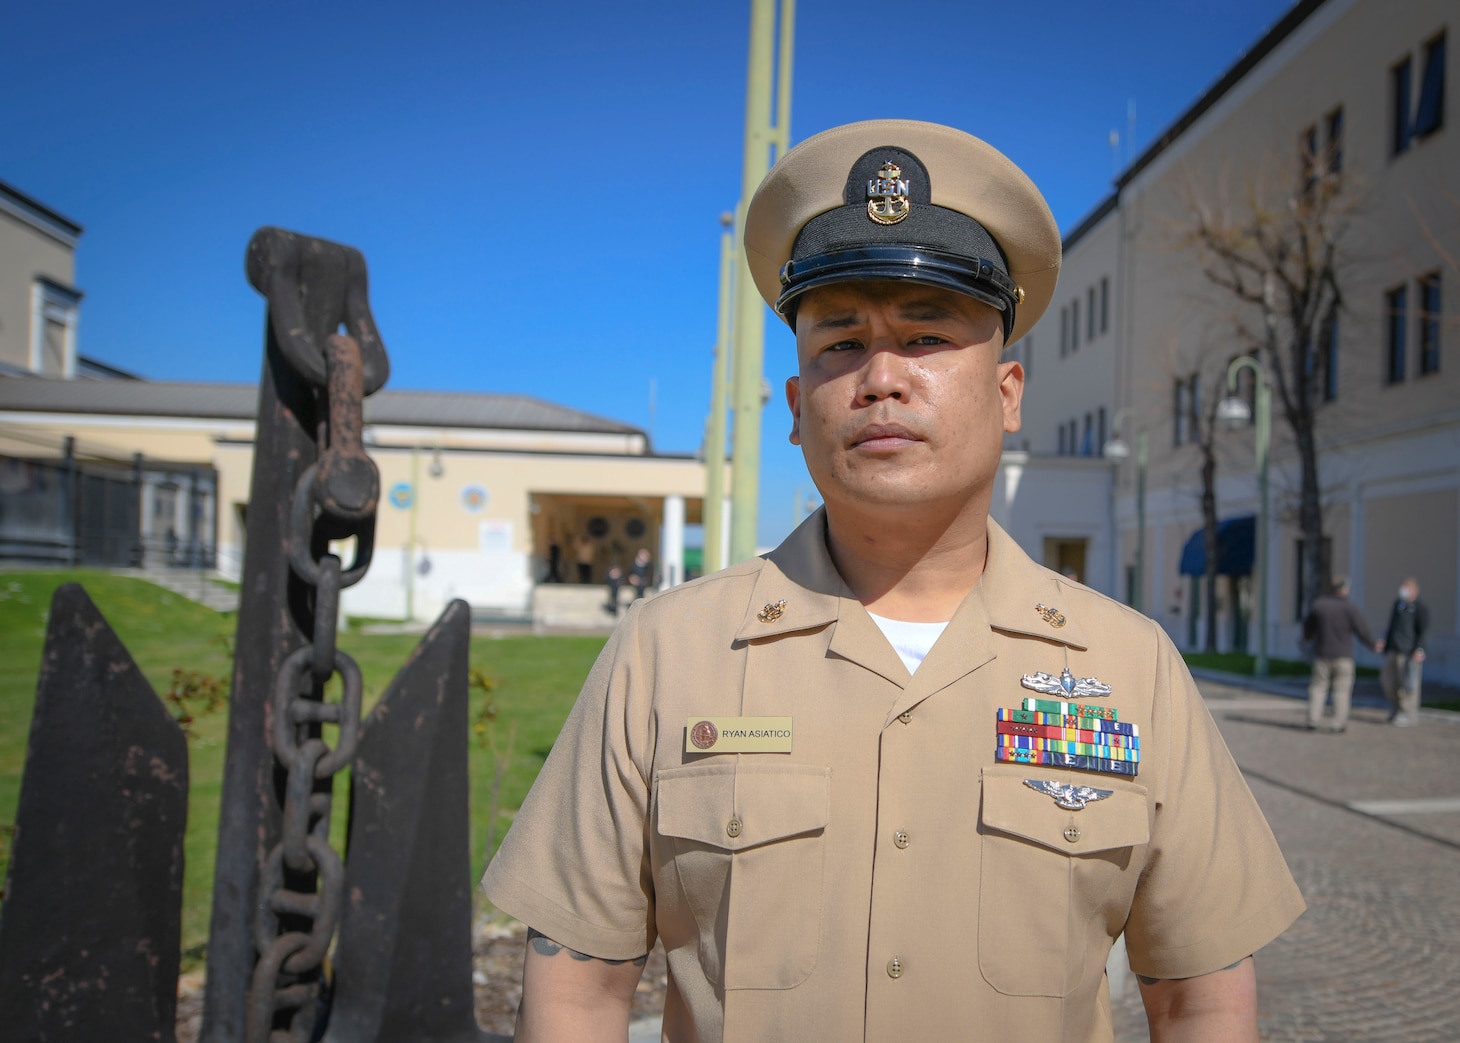 Senior Chief Logistics Specialist Ryan Asiatico, assigned to Military Sealift Command Europe and Africa, poses for a portrait on Naval Support Activity, Naples, Mar. 31, 2021, in celebration of the 128th birthday of the Chief Petty Officer ranks.